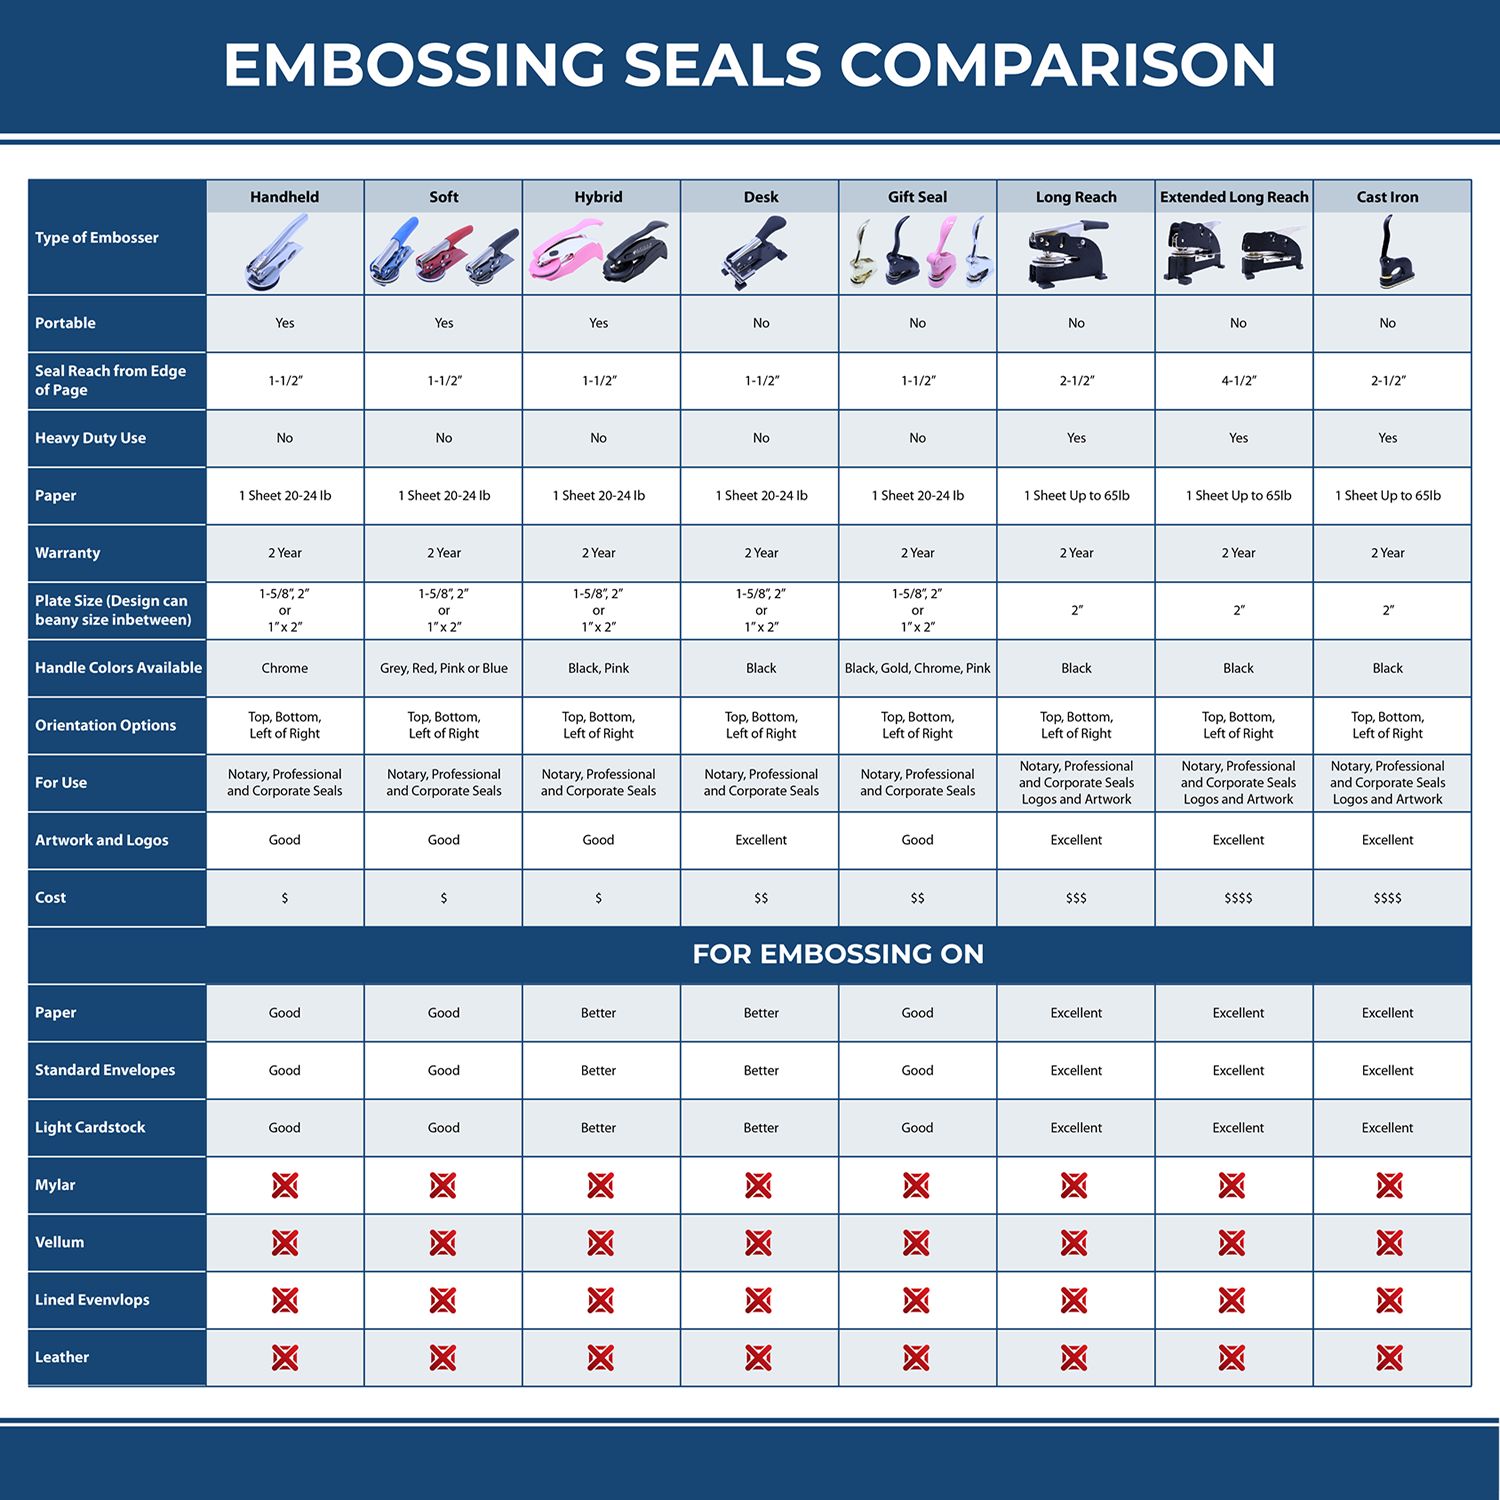 A comparison chart for the different types of mount models available for the Hybrid Oregon Engineer Seal